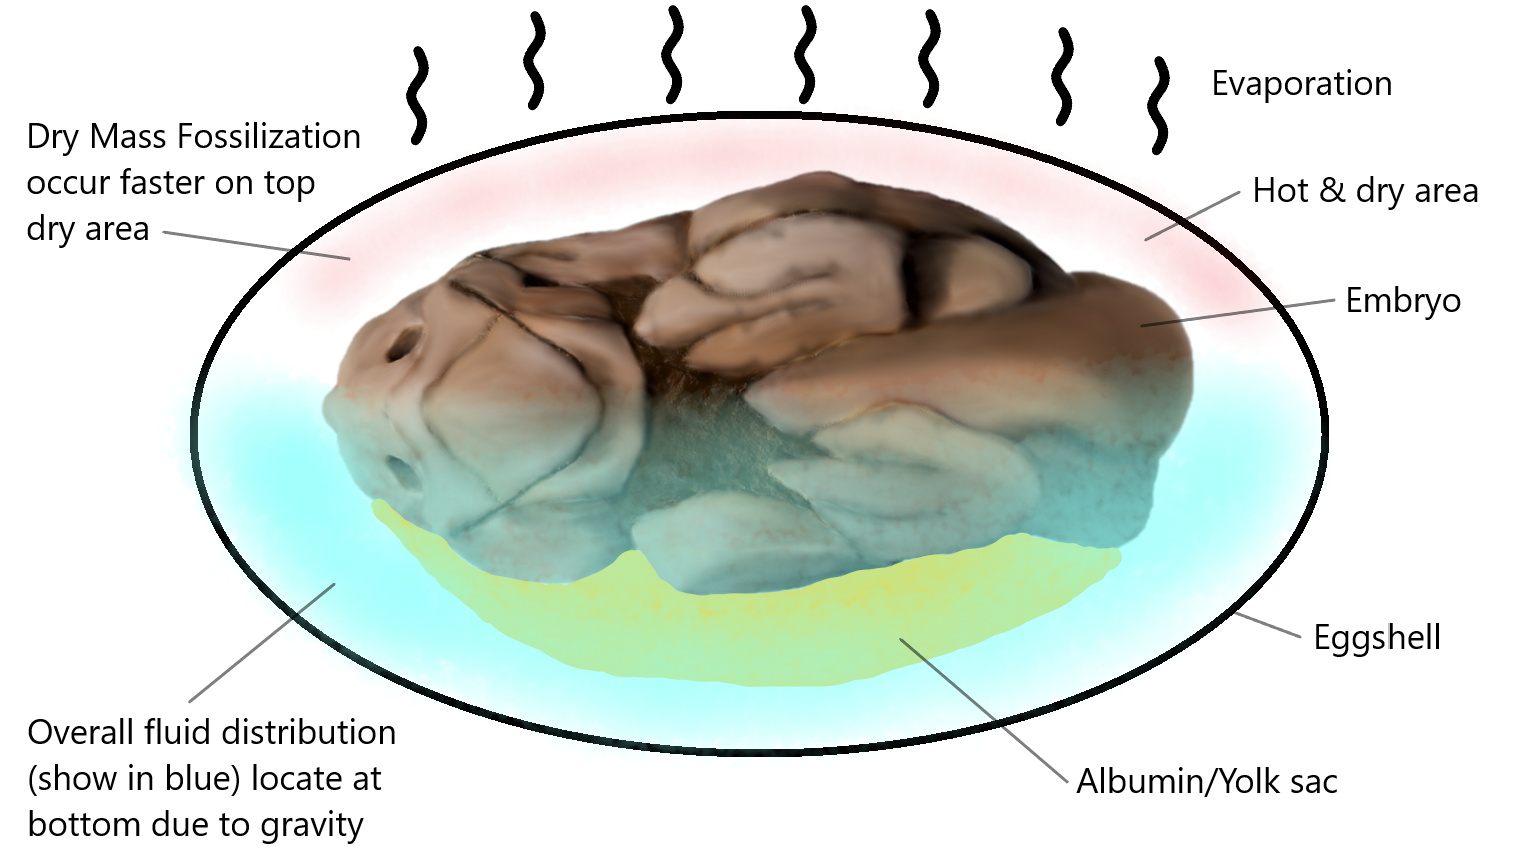 Figure 19. The picture shows how the total fluid distribution within the egg when the embryo dies in dry season. Most fluid will locate at bottom level due to gravity pull which has the slowest rate to form dry body mass that leads to high decay rate.